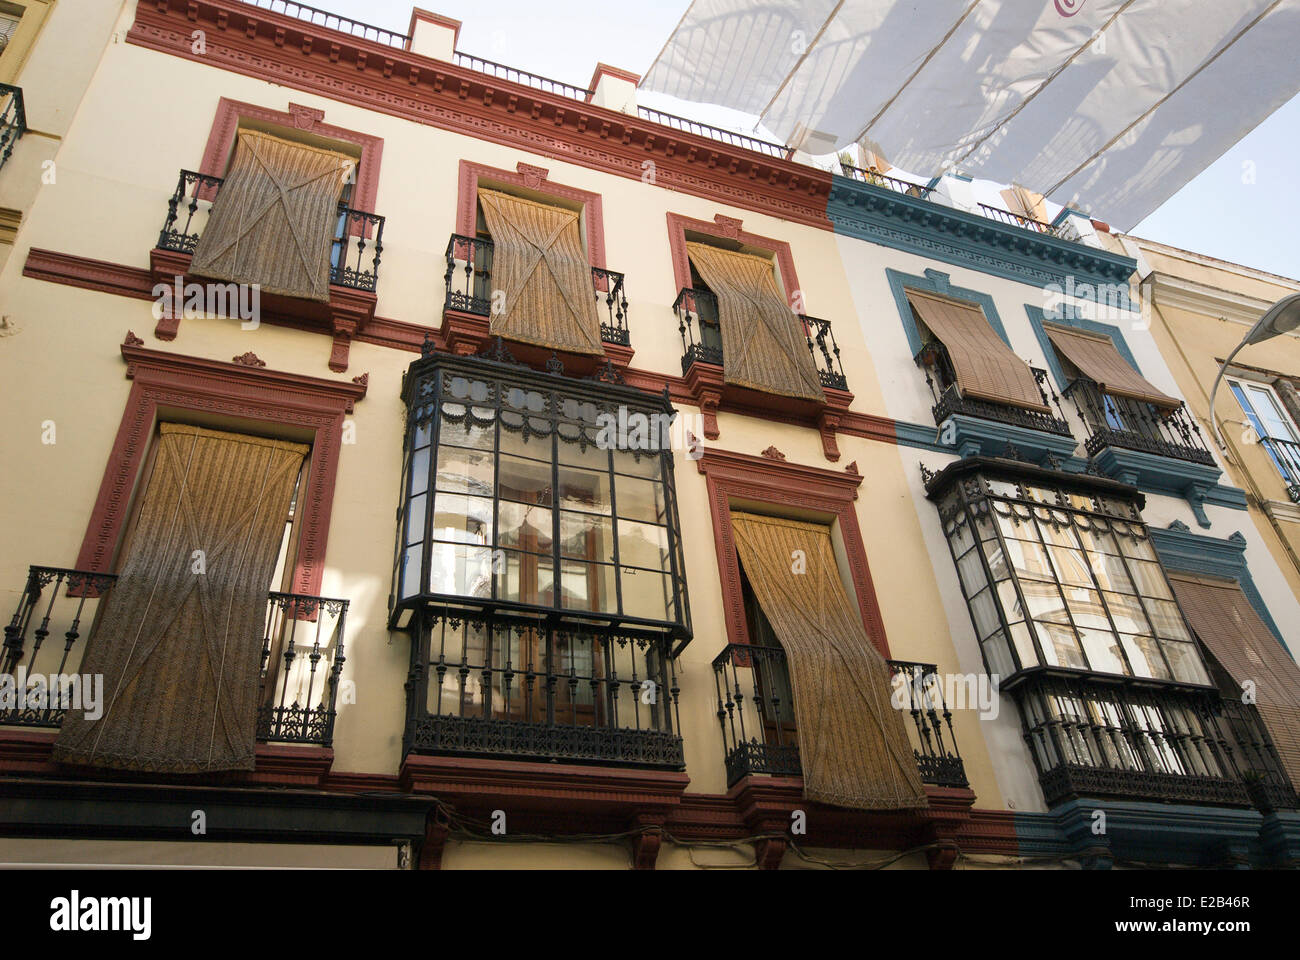 Spain, Andalucia, Seville, wrought iron balconies and awnings Alfa Stock Photo